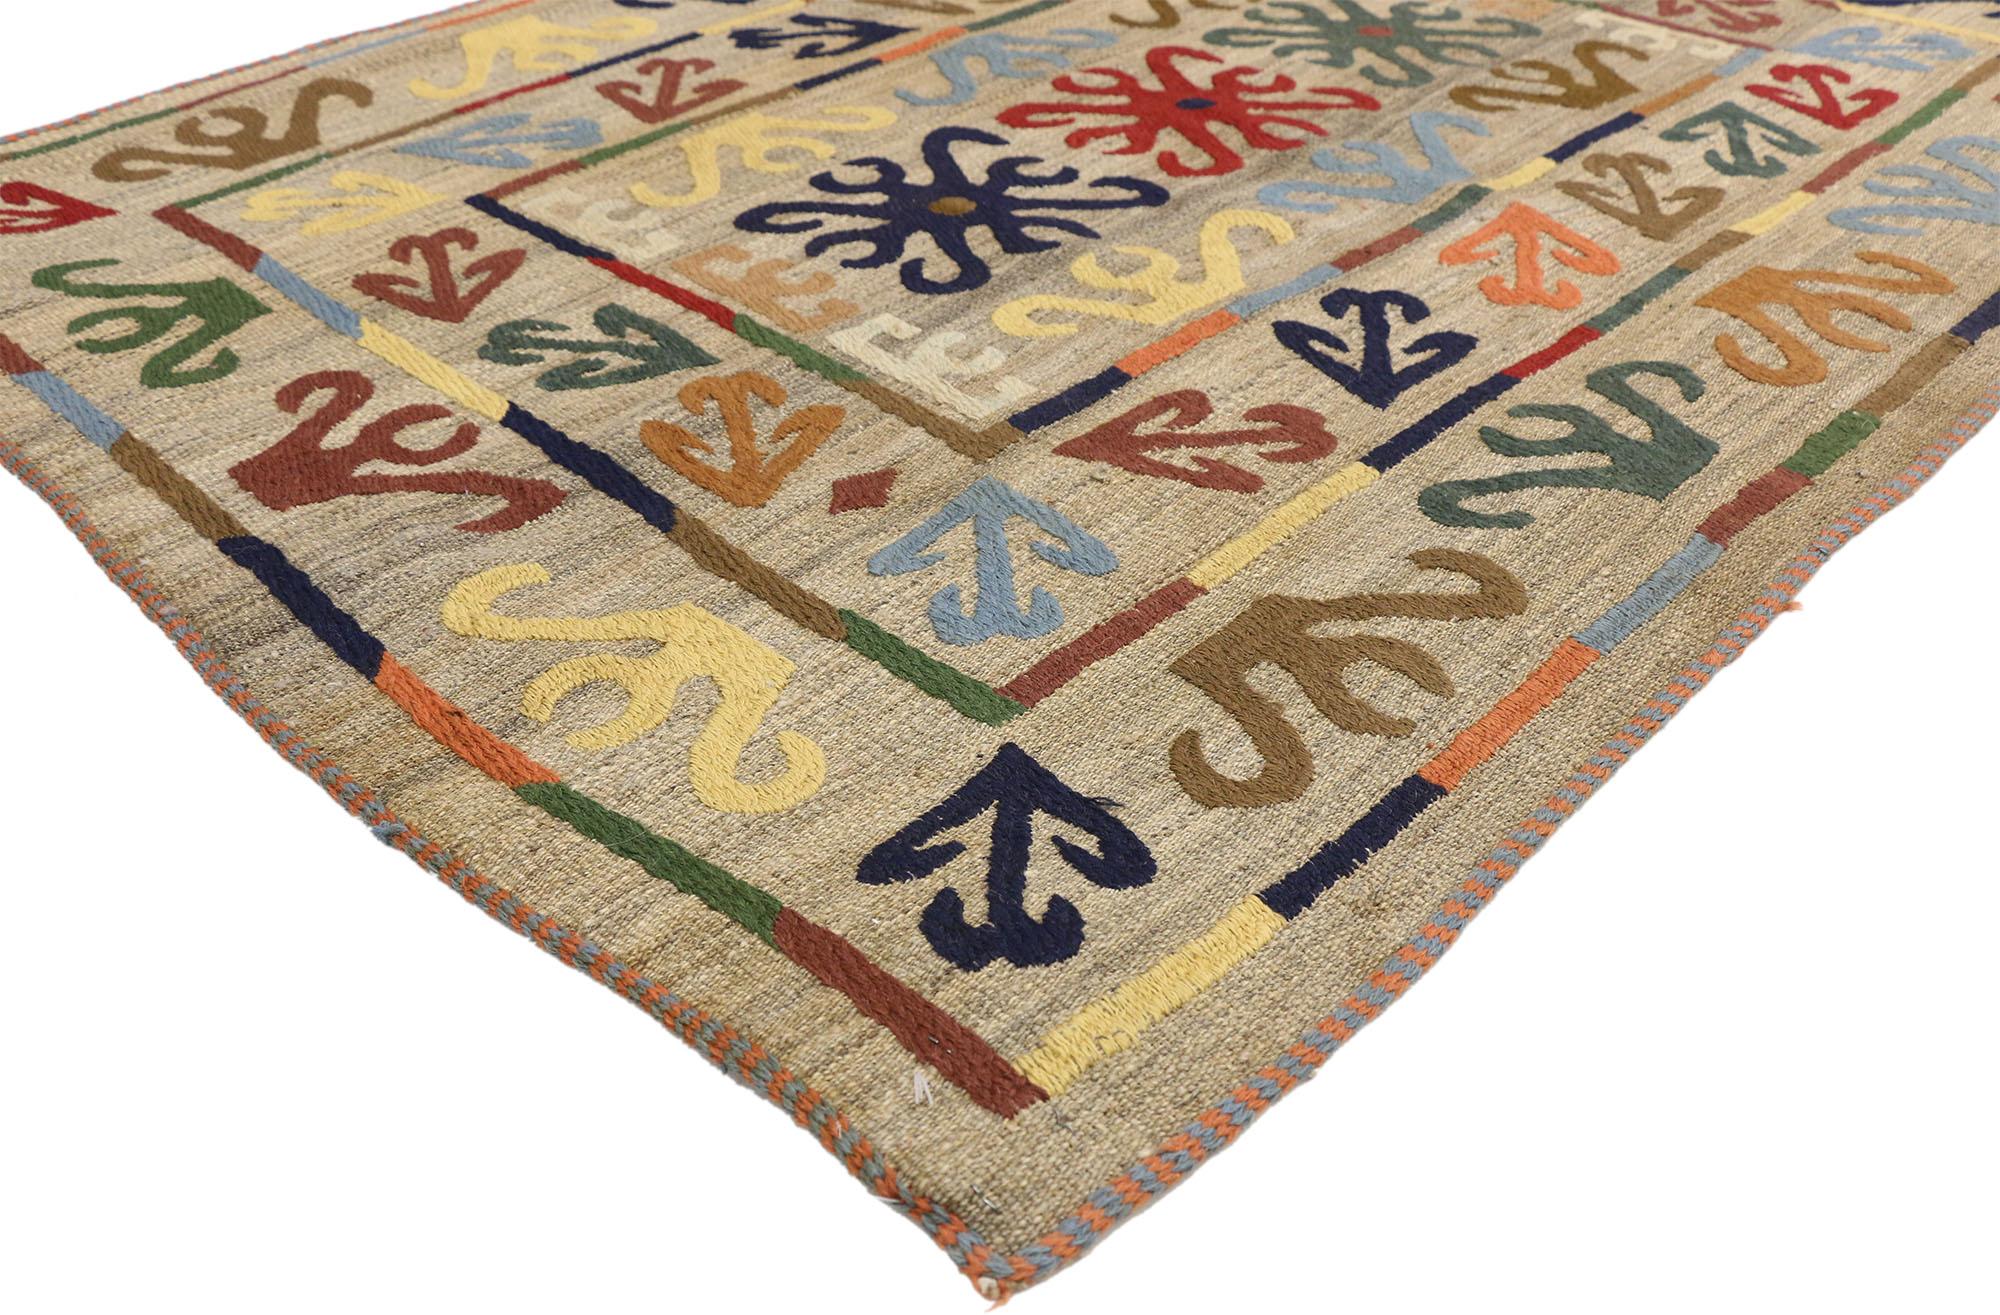 76994 Vintage Afghan Suzani Kilim Rug with Modern Tribal Style. This vintage Afghan Suzani Kilim rug with modern tribal style communicates some of the finer and more important points of geometric design elements. Classically composed and boasting